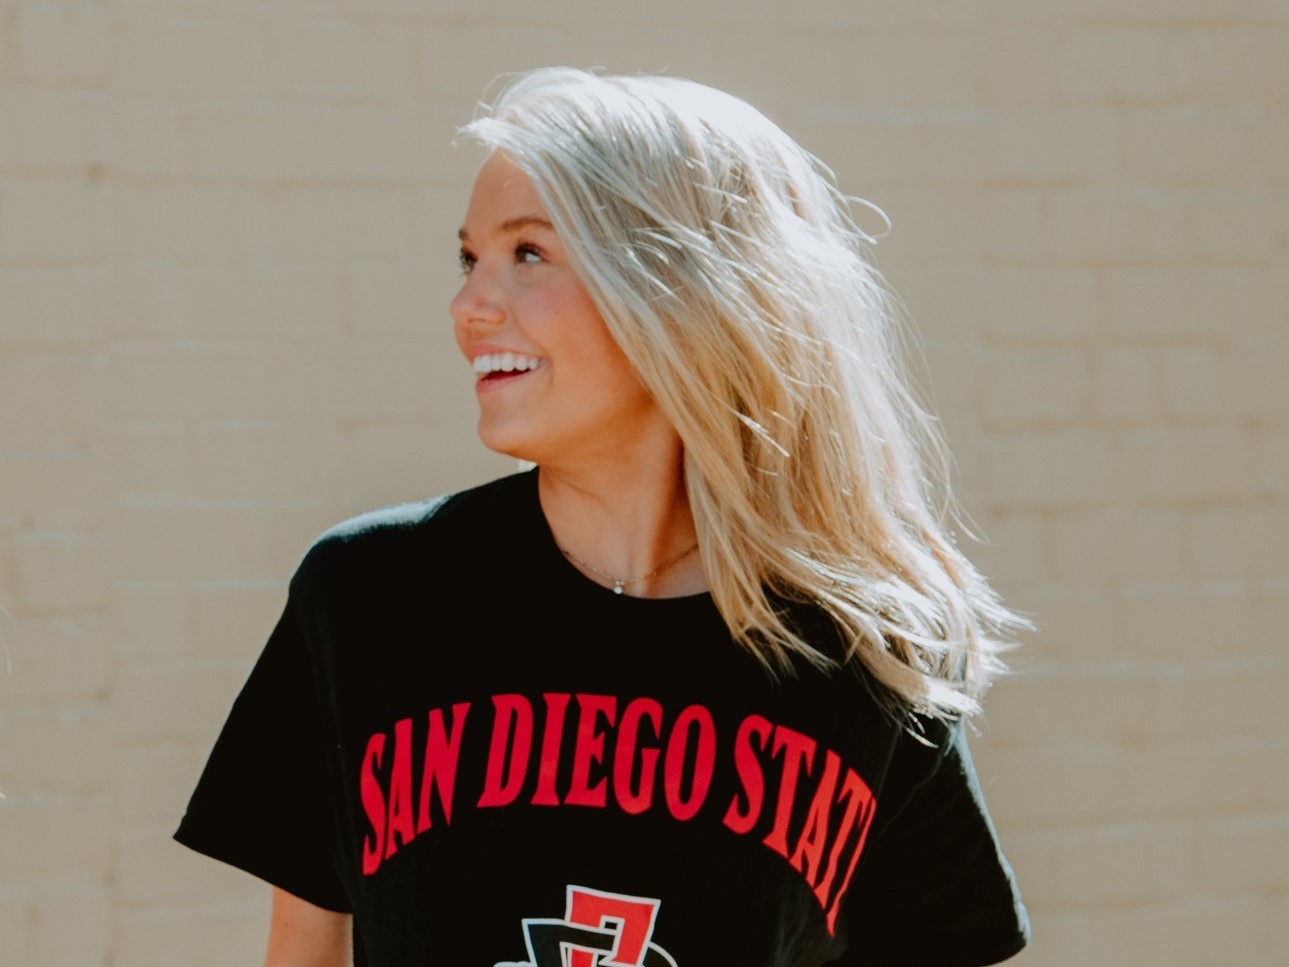 A girl in a San Diego State shirt smiling